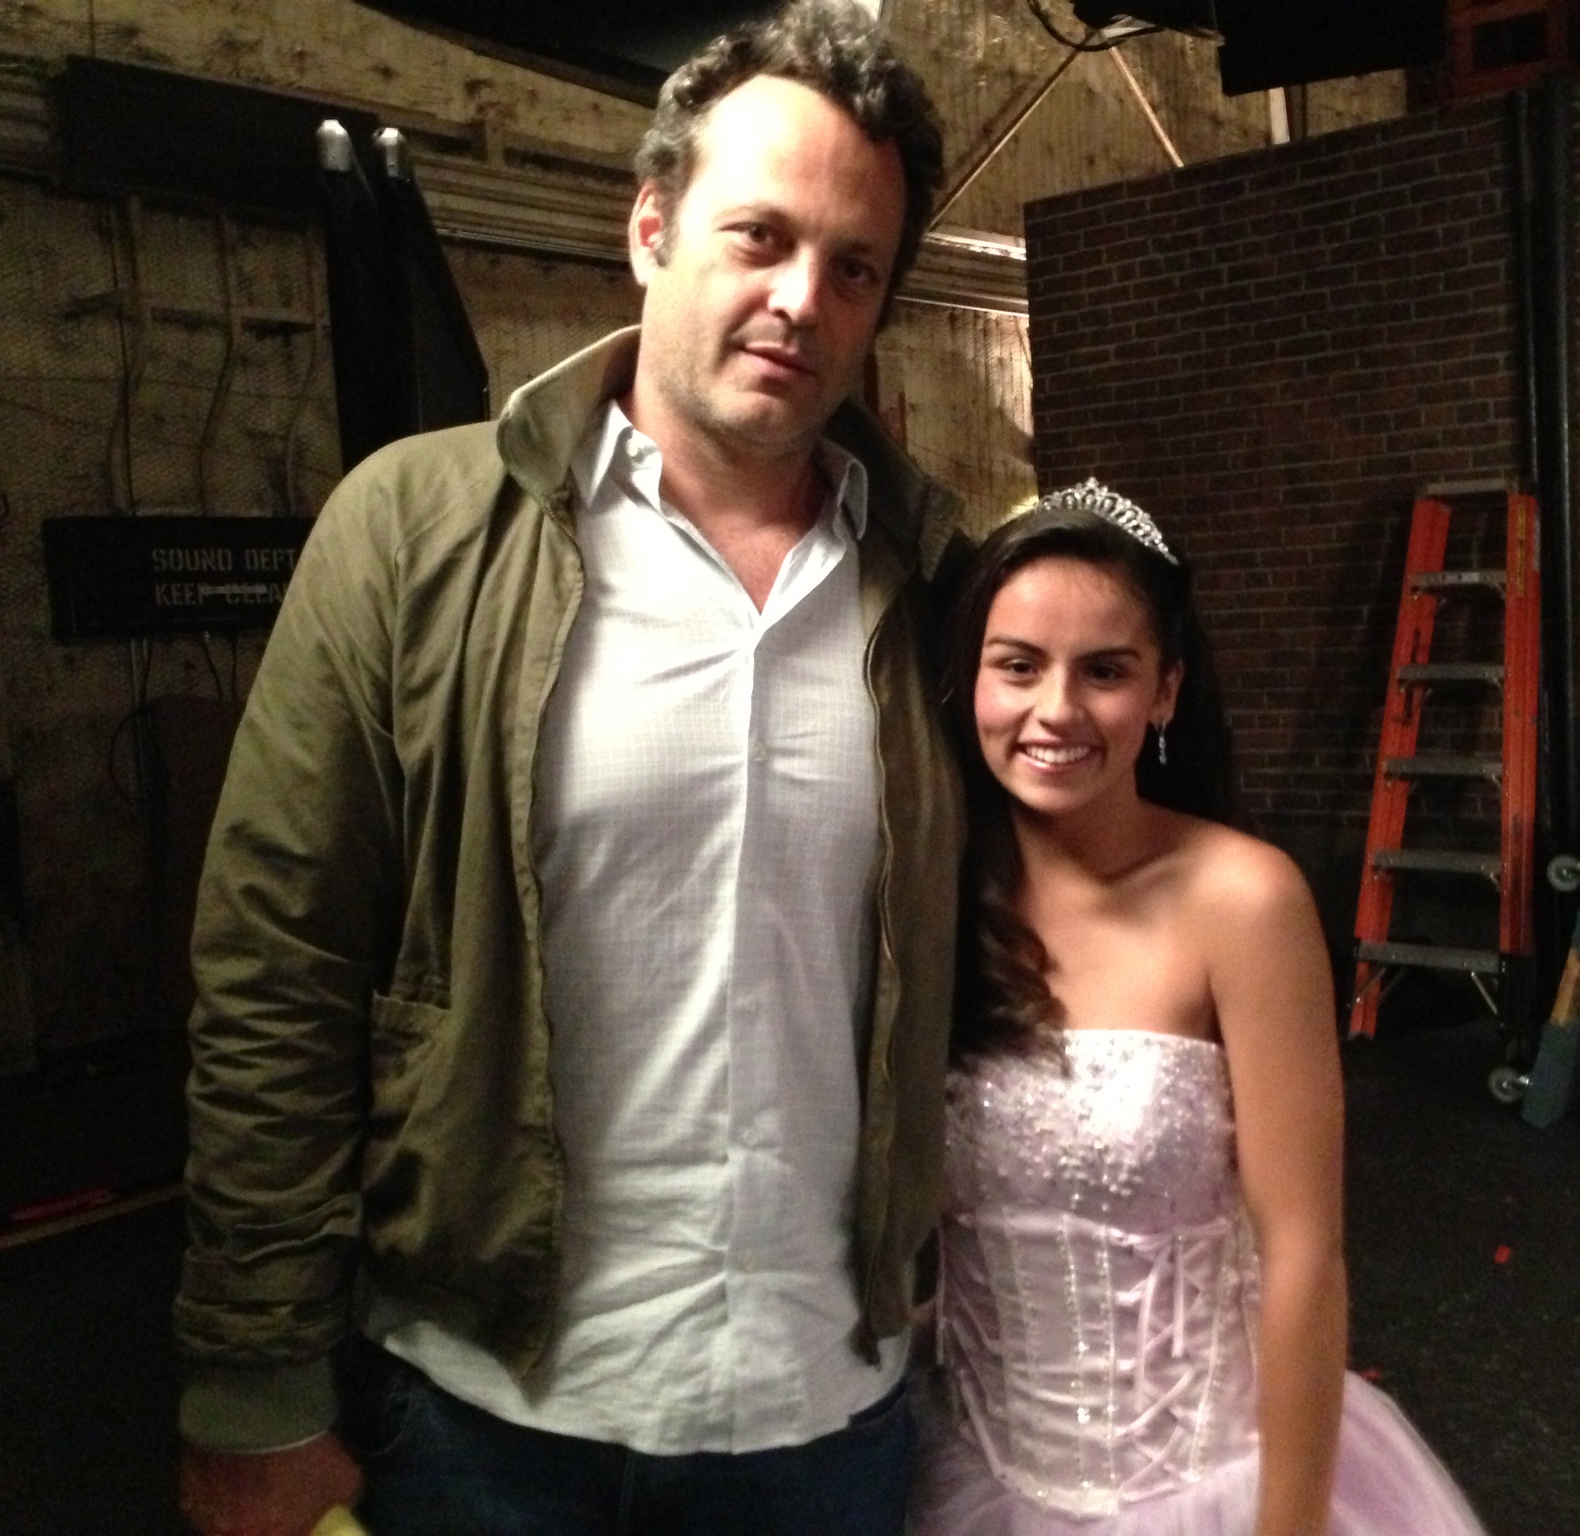 Lexi with Vince Vaughn